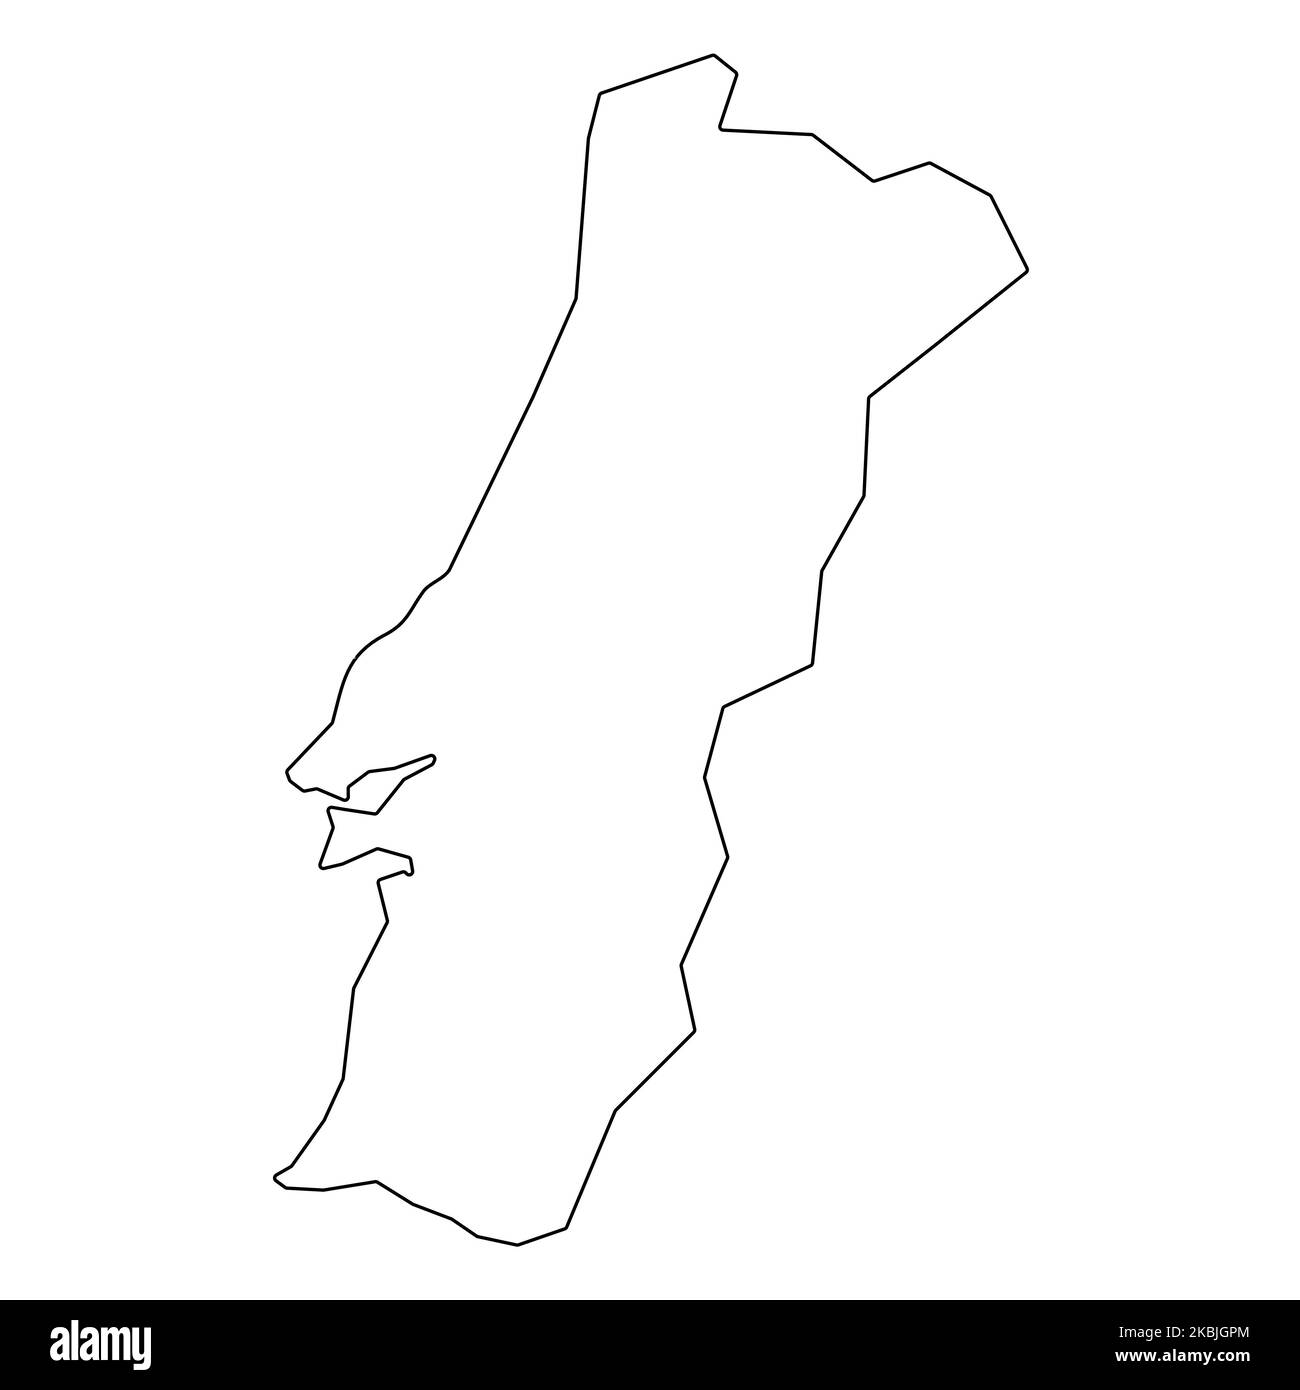 Portugal Outline Map Set Detailed Map Coastline Portugal Map Vector Vector,  Detailed Map, Coastline, Portugal Map Vector PNG and Vector with  Transparent Background for Free Download